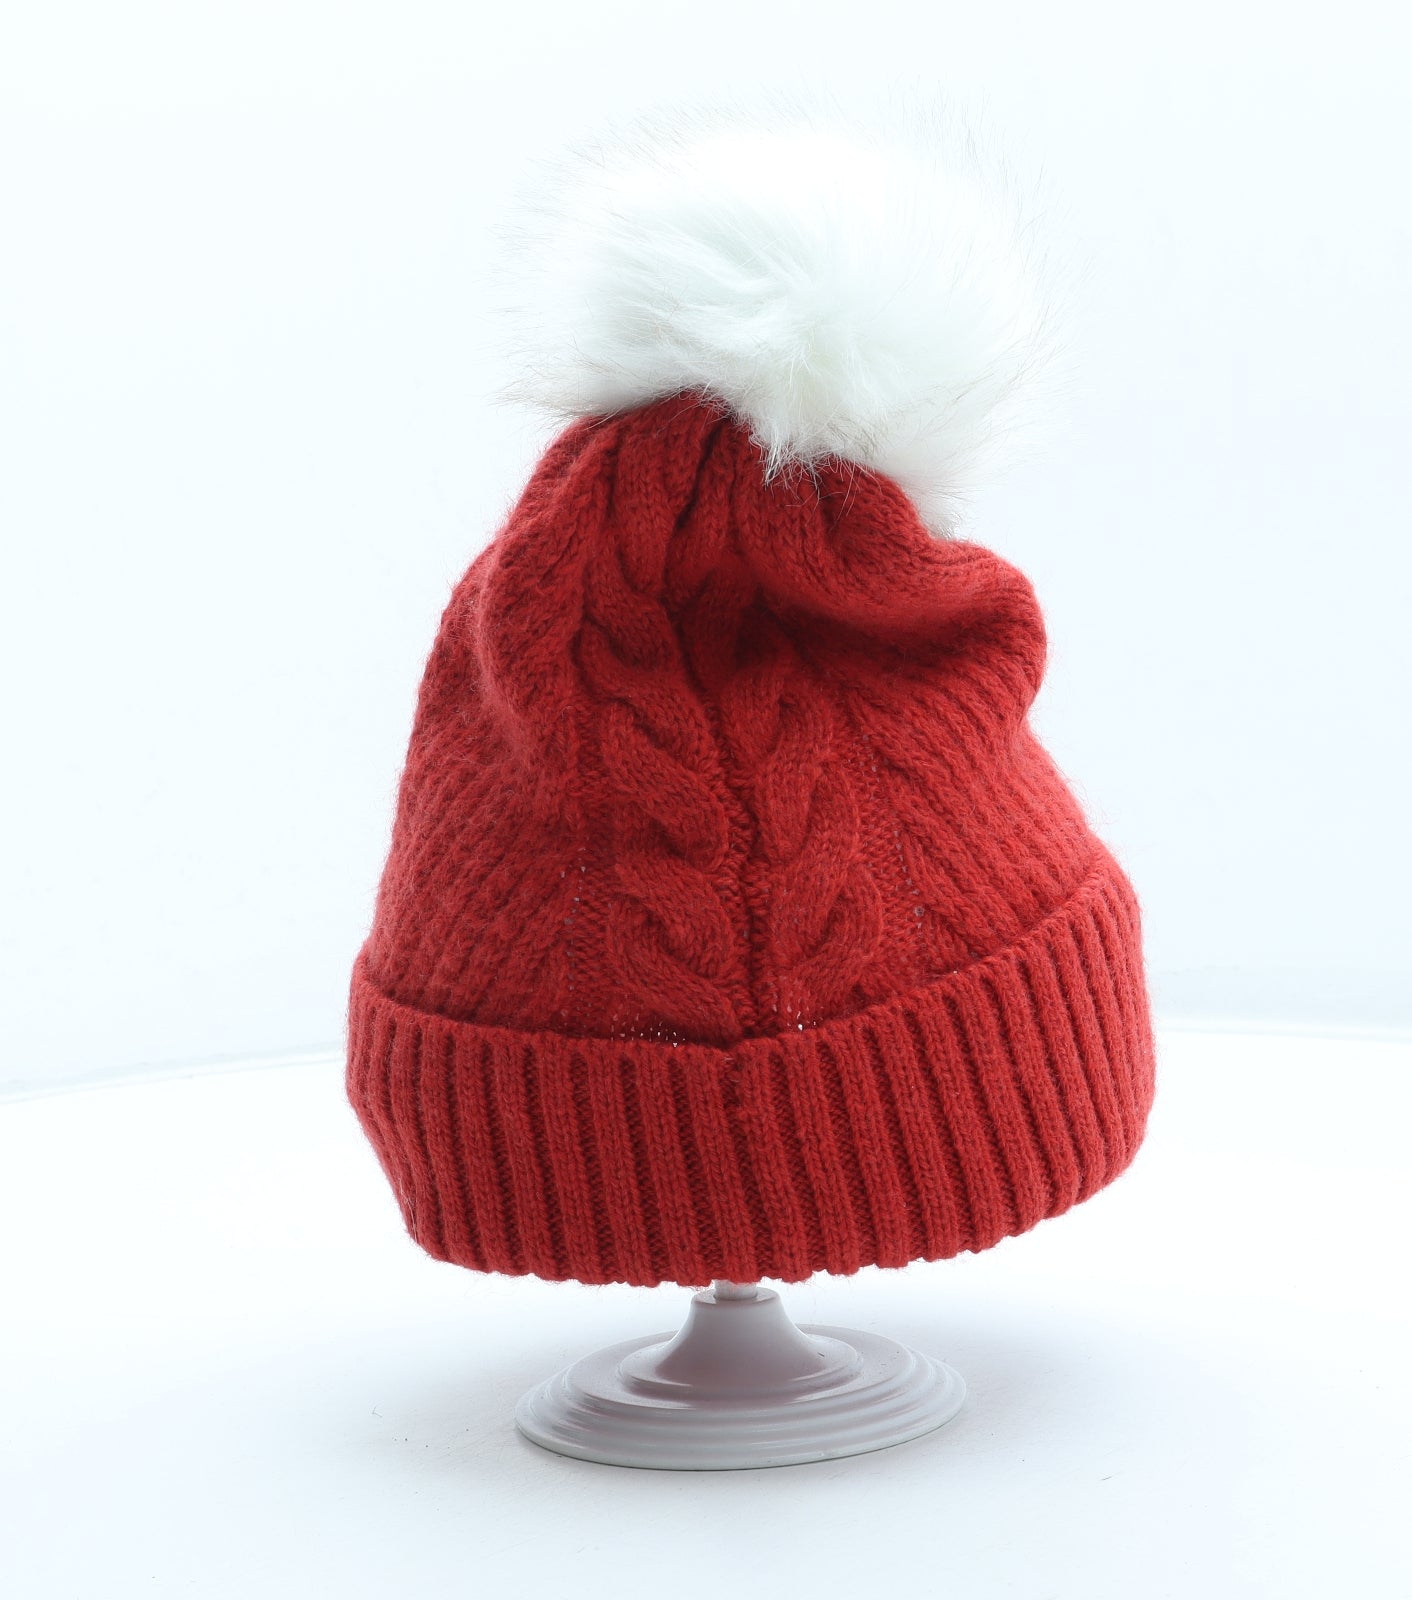 Jack Wills Womens Red Acrylic Bobble Hat One Size